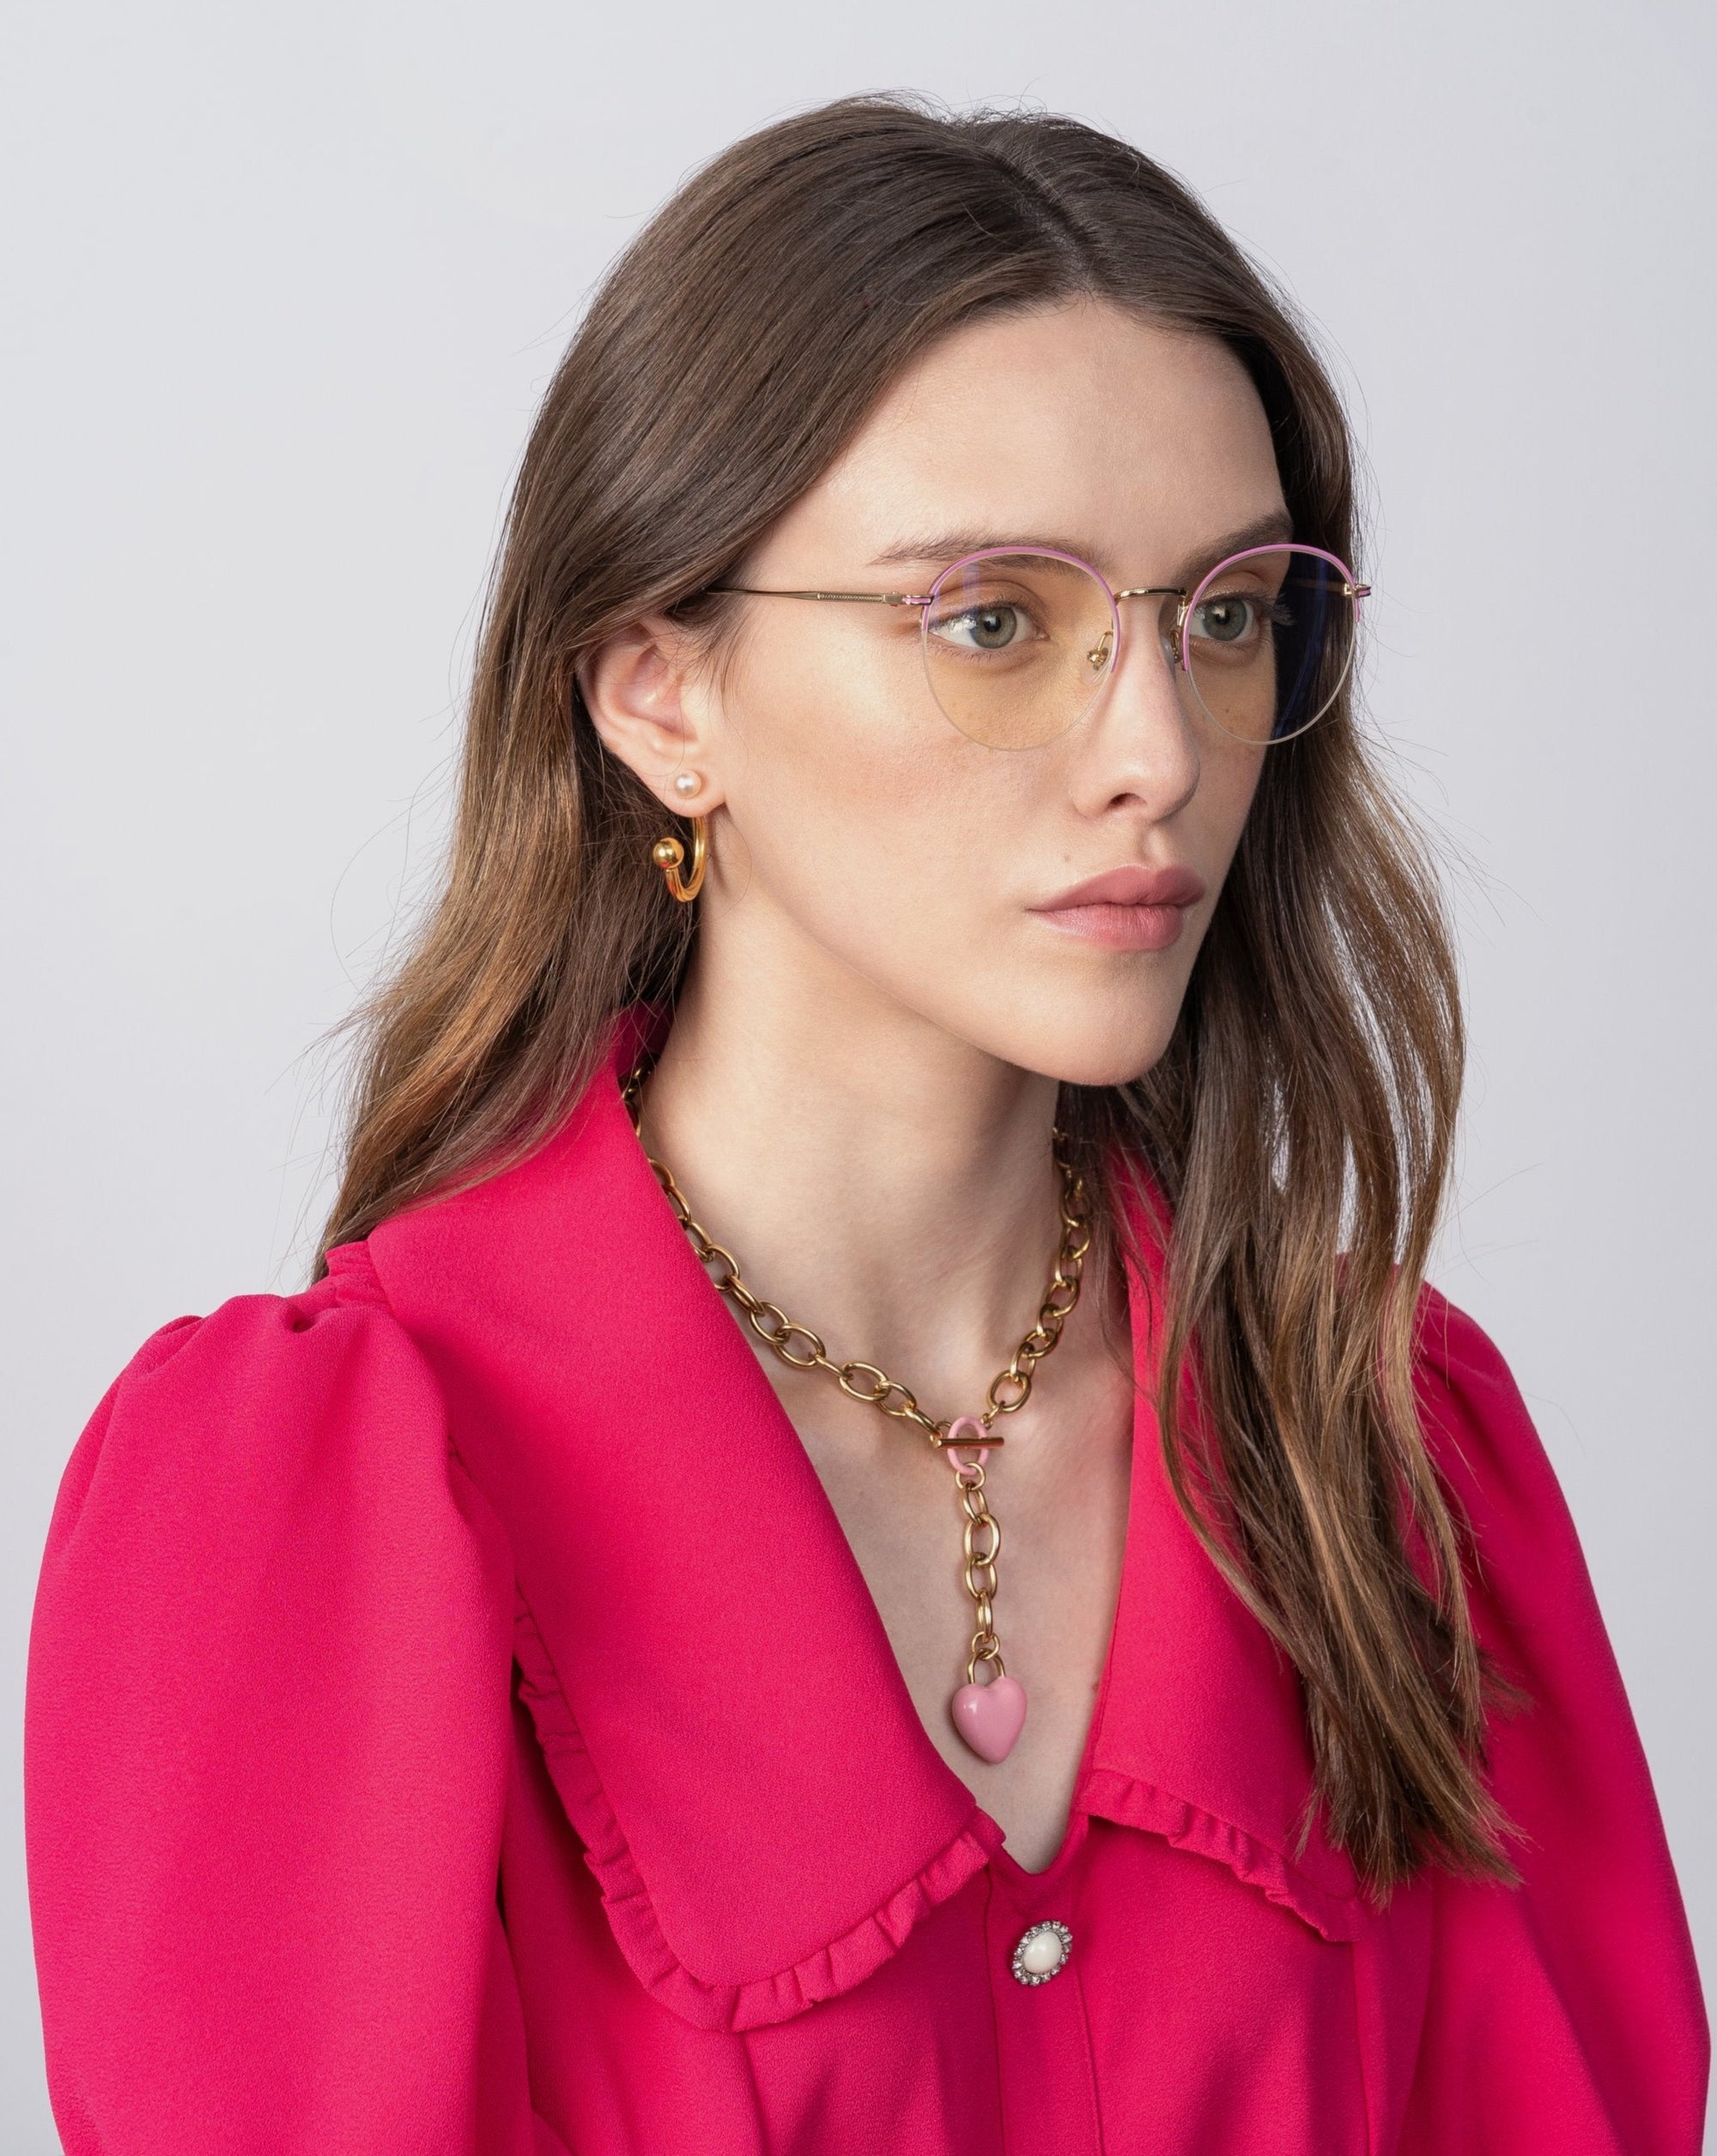 A woman with long brown hair wears a bright pink blouse with puffed sleeves and a red collar. She accessorizes with Ivy glasses by For Art&#39;s Sake® featuring prescription lenses, gold hoop earrings, and a chunky gold chain necklace with a pink heart pendant. The background is plain and light-colored.